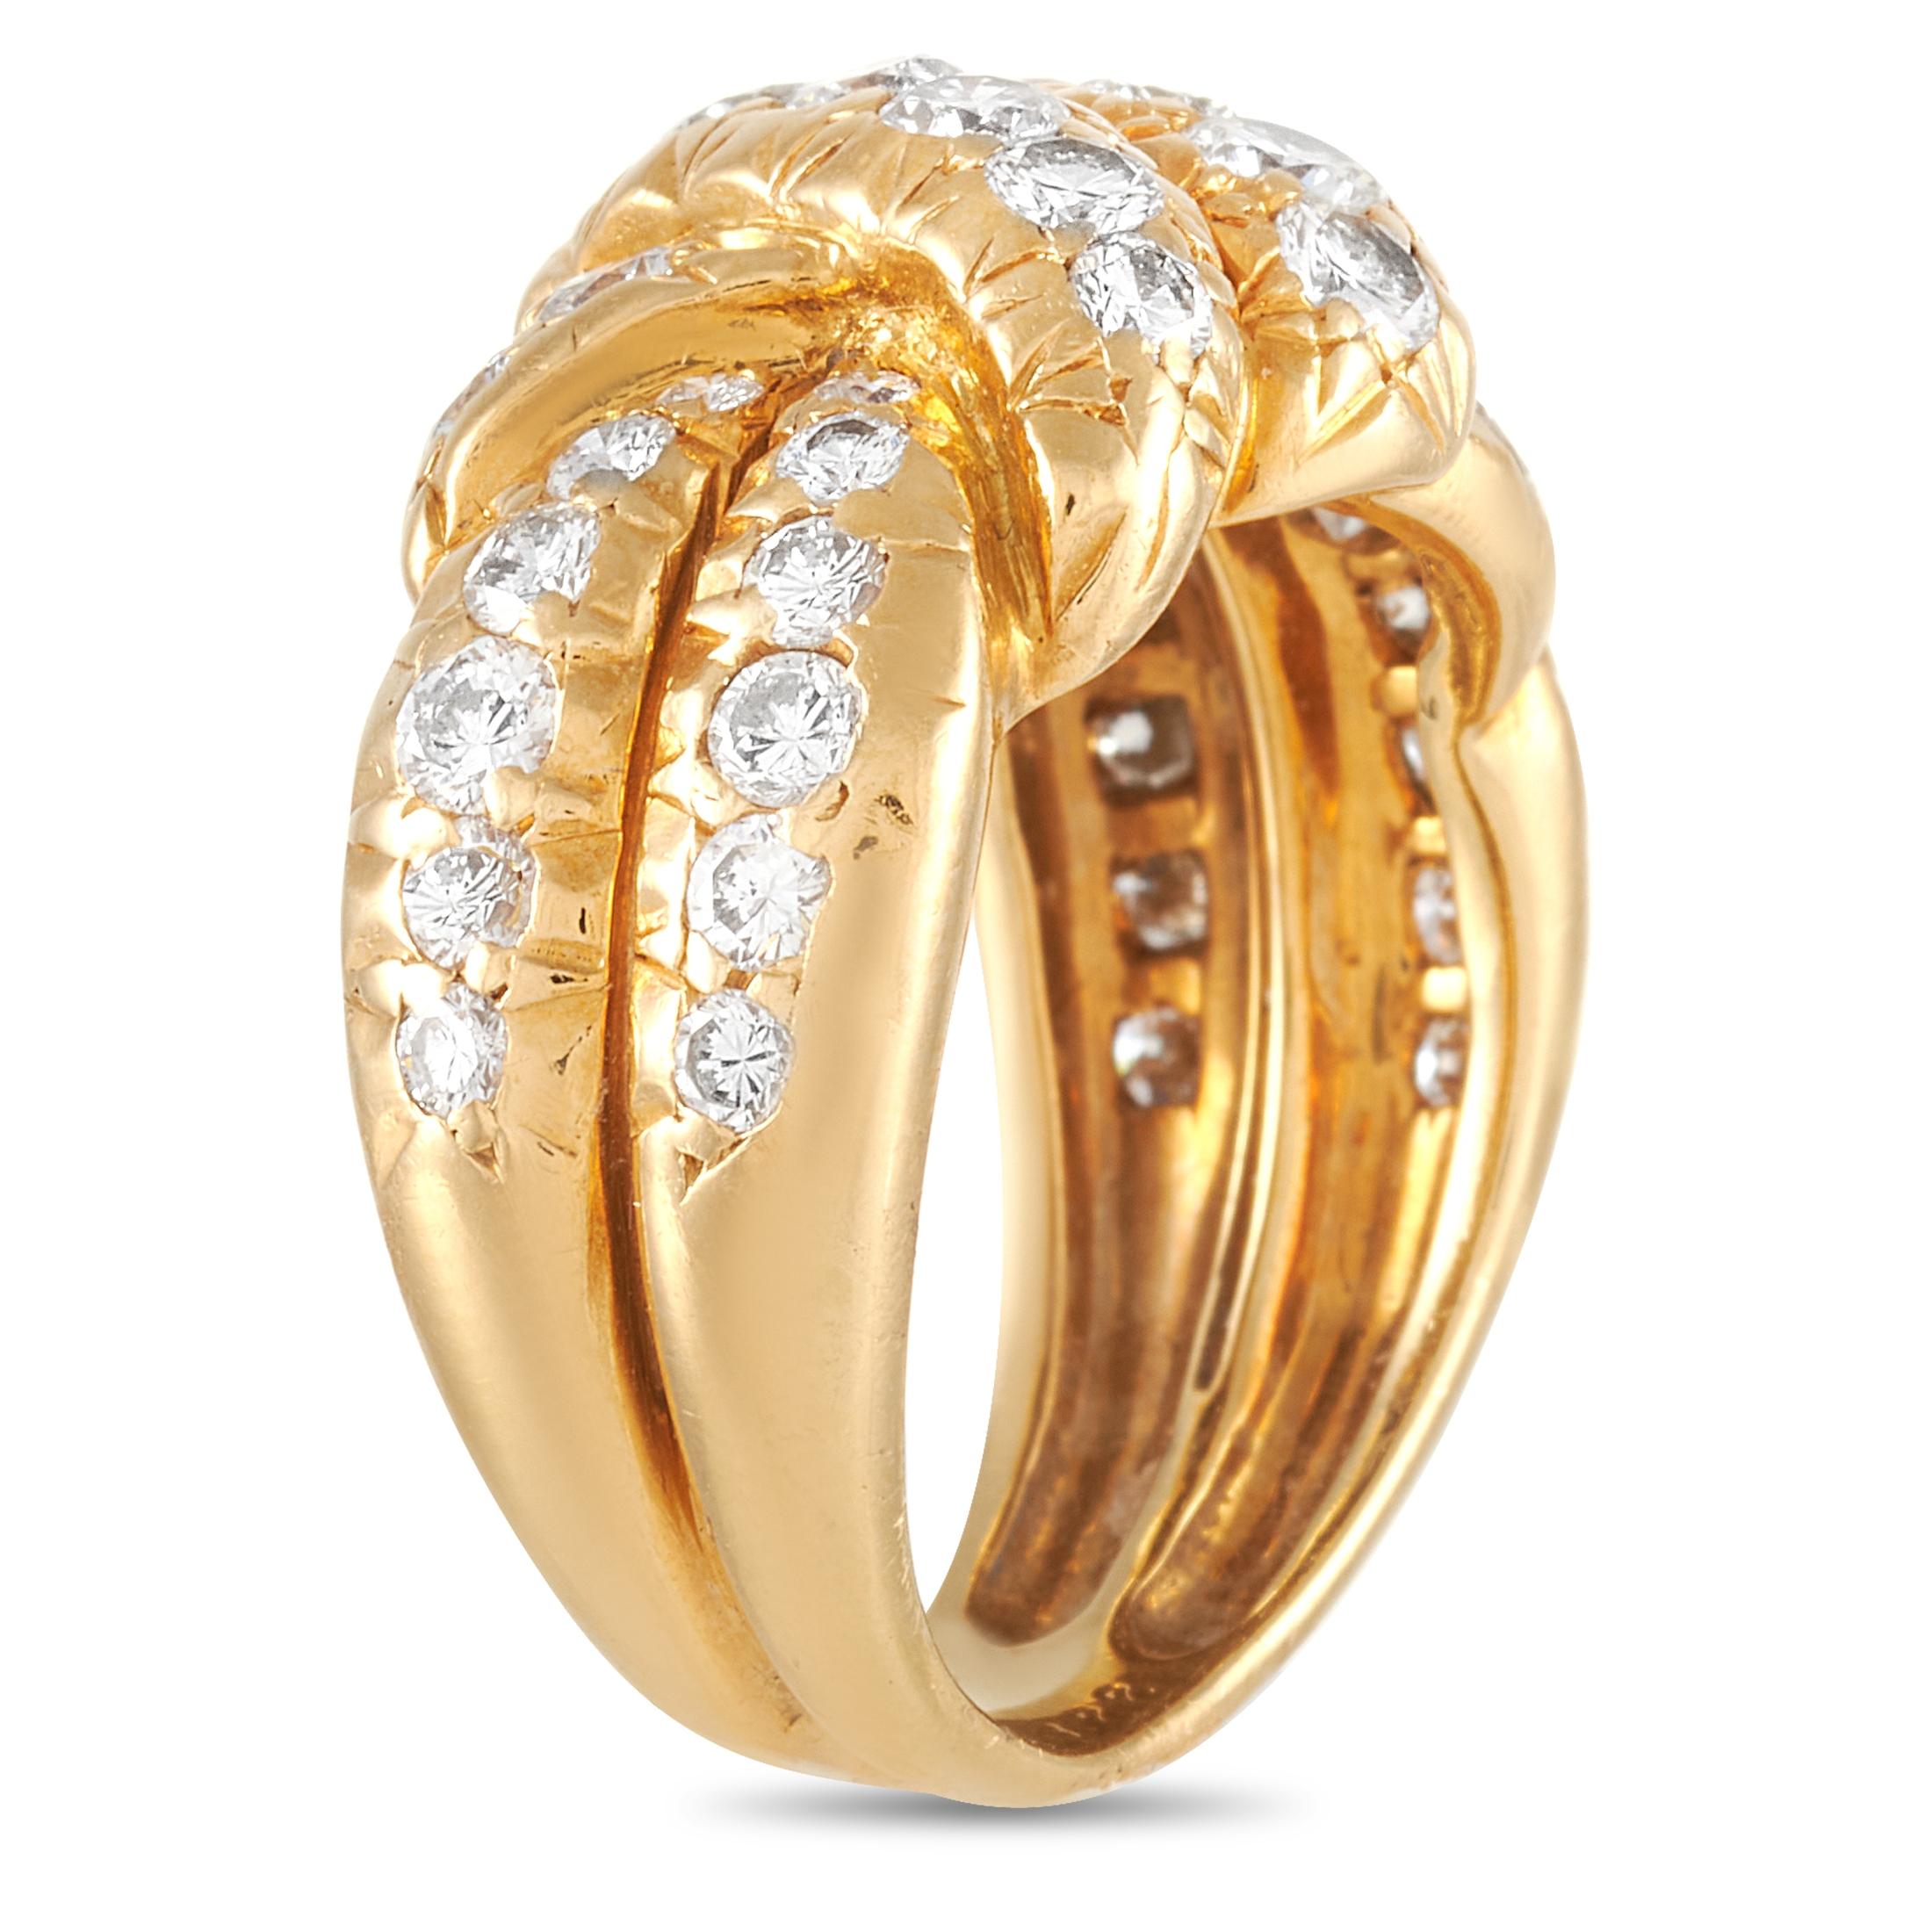 This Van Cleef & Arpels 18K Yellow Gold 1.75 ct Diamond Ring is a statement piece made with braided 18K yellow gold and set with 1.75 carats of round diamonds. The ring has a band thickness of 7 mm, a top height of 5 mm, and top dimensions of 13 by